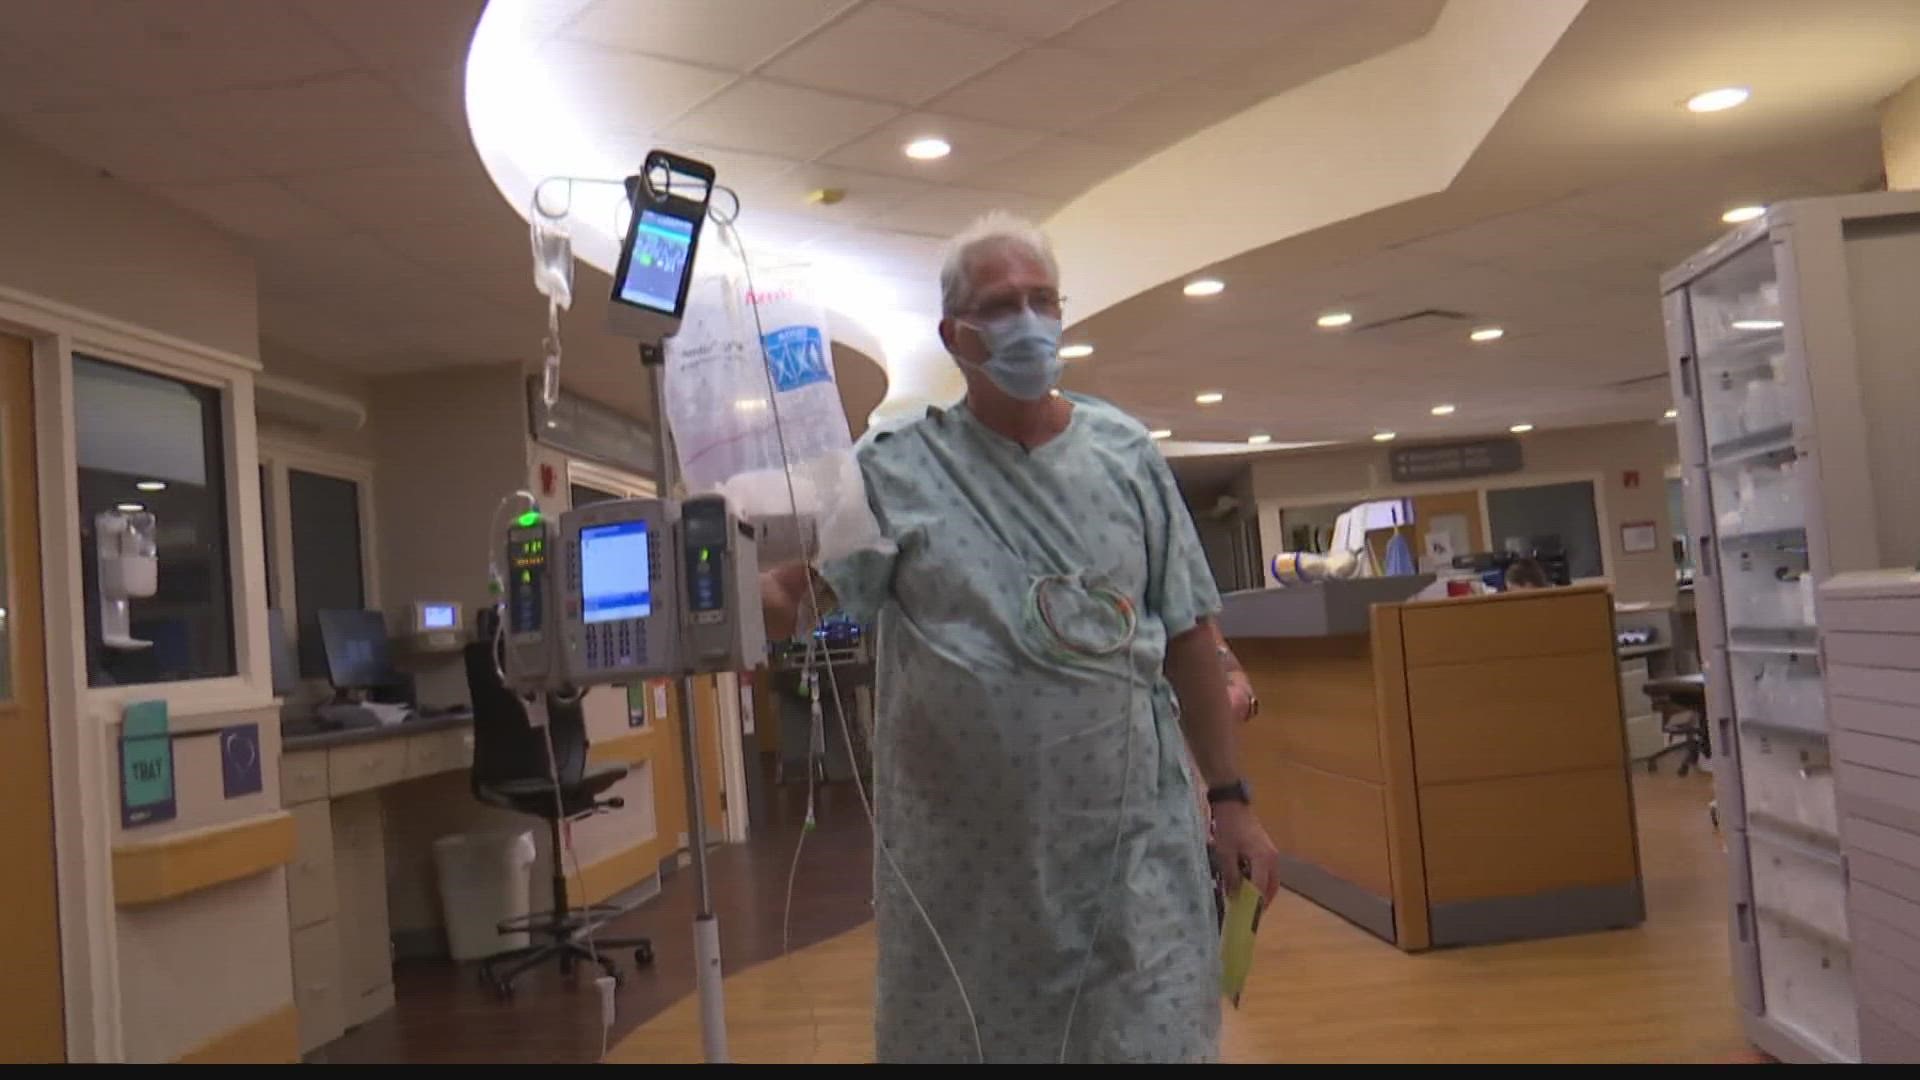 Last summer, we did a story about an Indianapolis man waiting for months for a heart and kidney transplant at Methodist Hospital. Now he's been given new life.